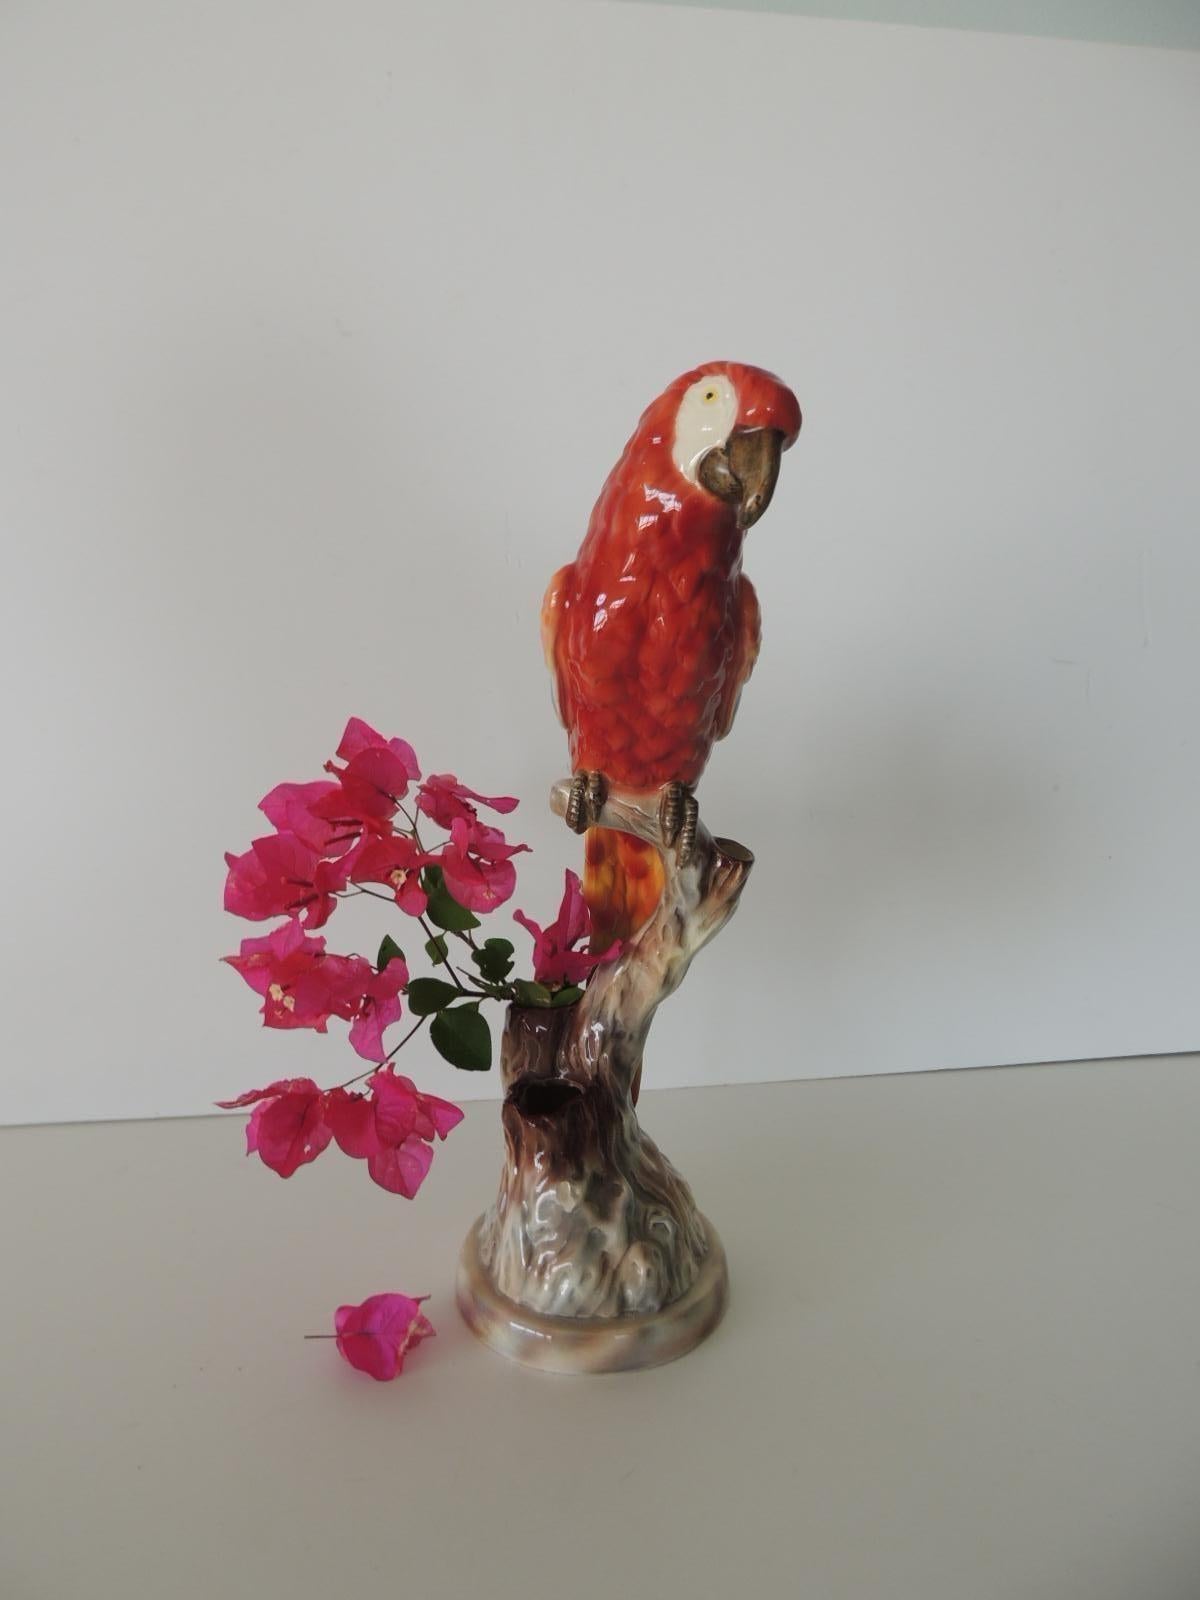 Will George California Porcelain Art Pottery Macaw parrot figurine vase 1940's.
Pasadena. CA
Size: 5